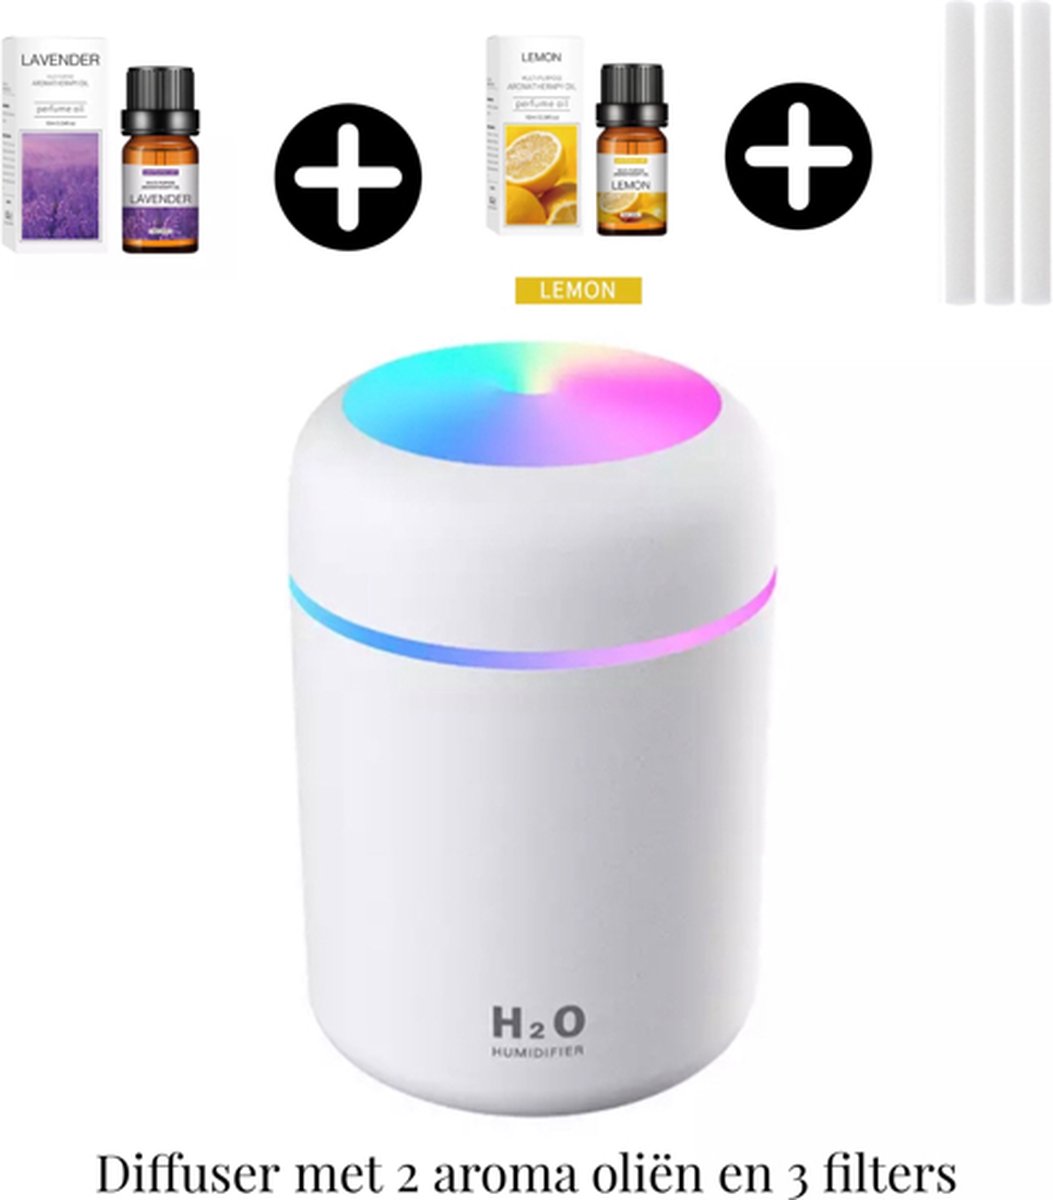 Aroma Diffuser Wit-Luchtbevochtiger 300 ml - Incl. incl. 2 aroma oliën en 3 filters -LED sfeerverlichting- compact- Auto en huis gebruik- casamix